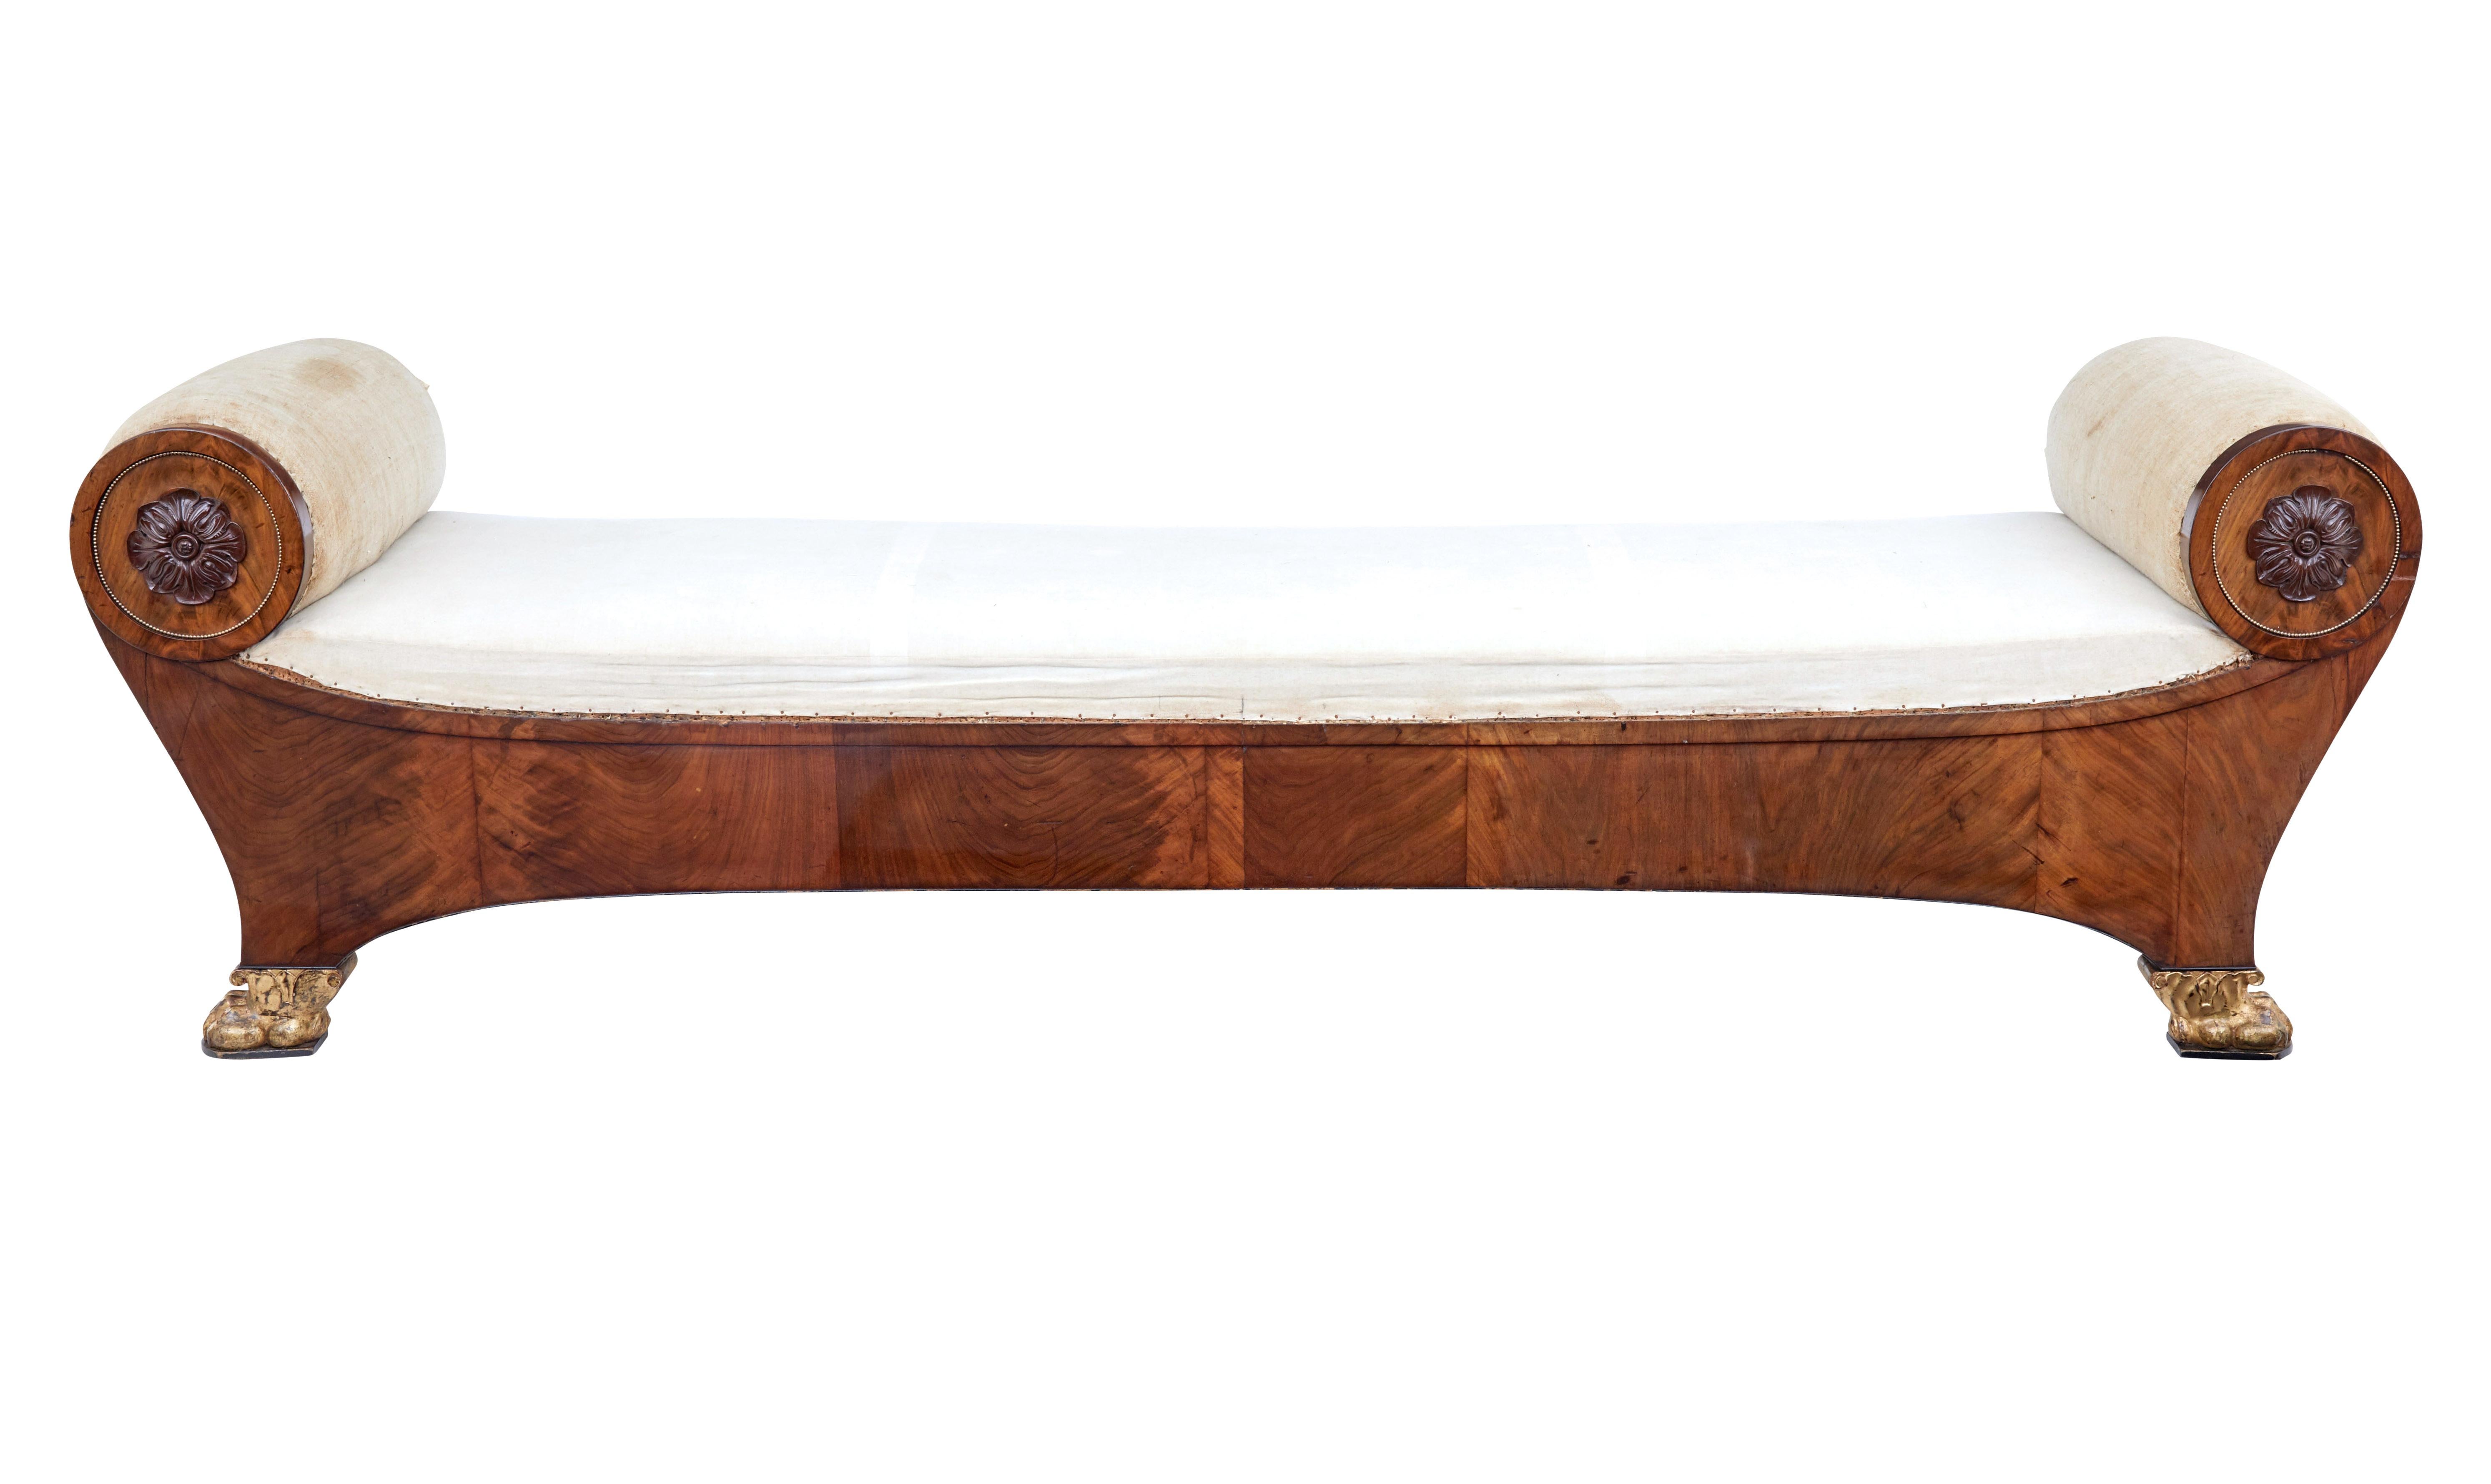 Stunning Danish Biedermeier influenced mahogany sofa of large proportions, circa 1830.

At just over 8 foot long, this sofa daybed is quite a statement piece, ideal for a hotel, shop or grand home.

Beautiful flame mahogany, with removable